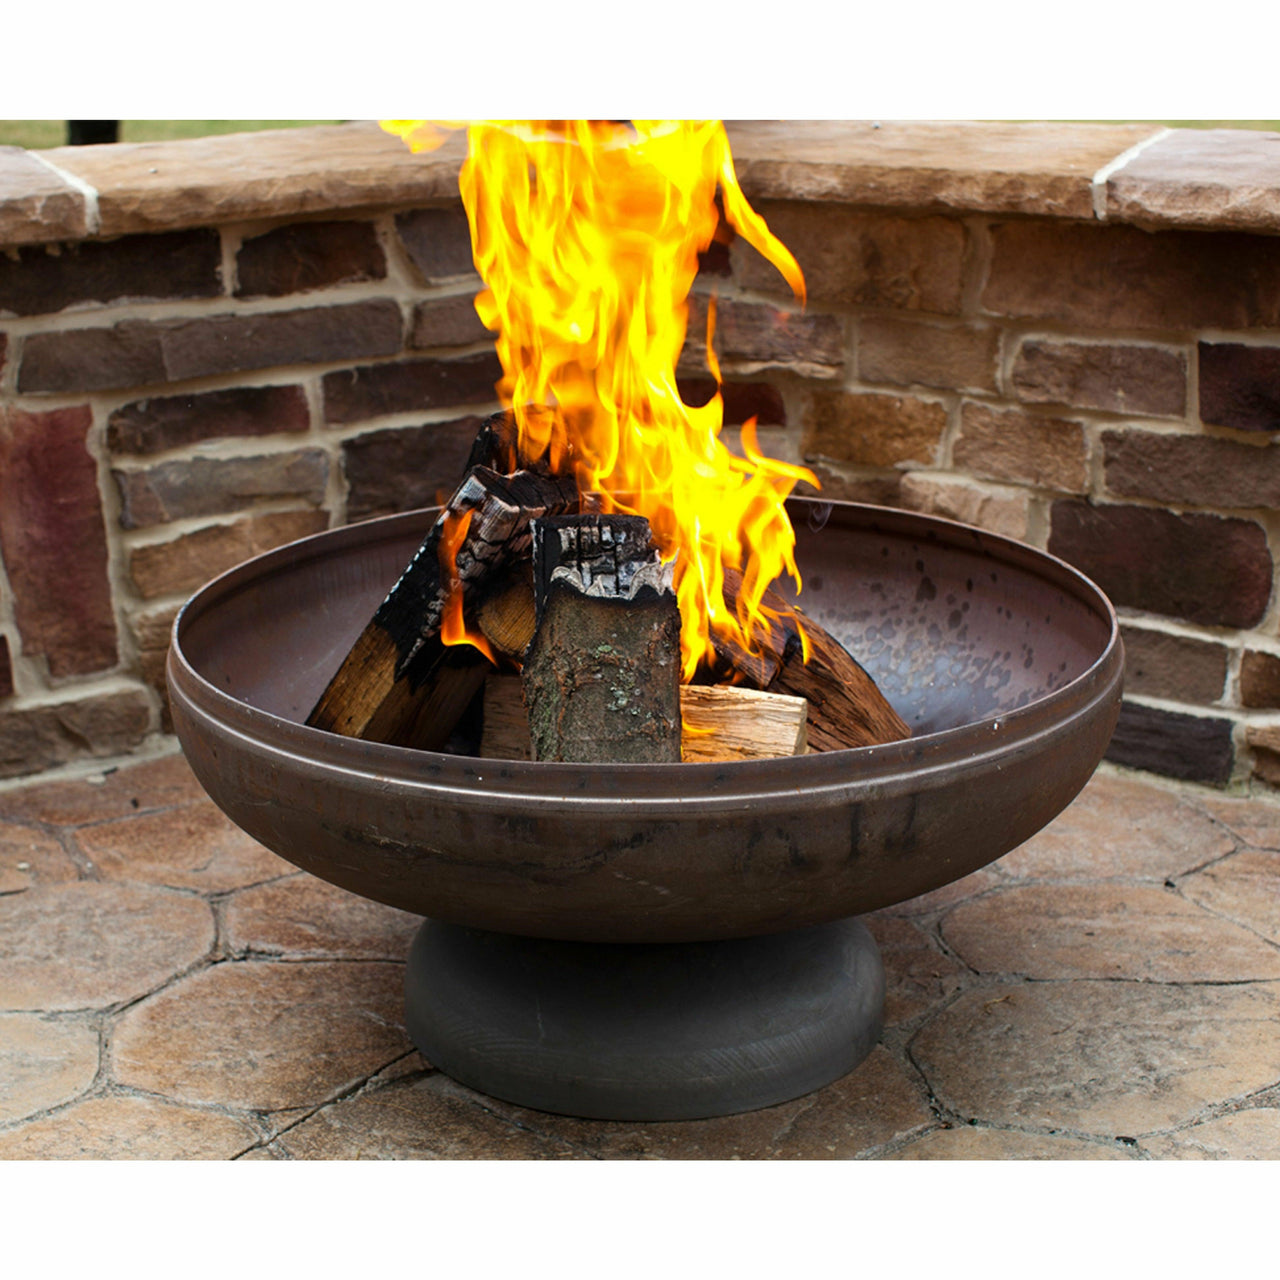 Ohio Flame Patriot Fire Pit - Fire Pit Stock